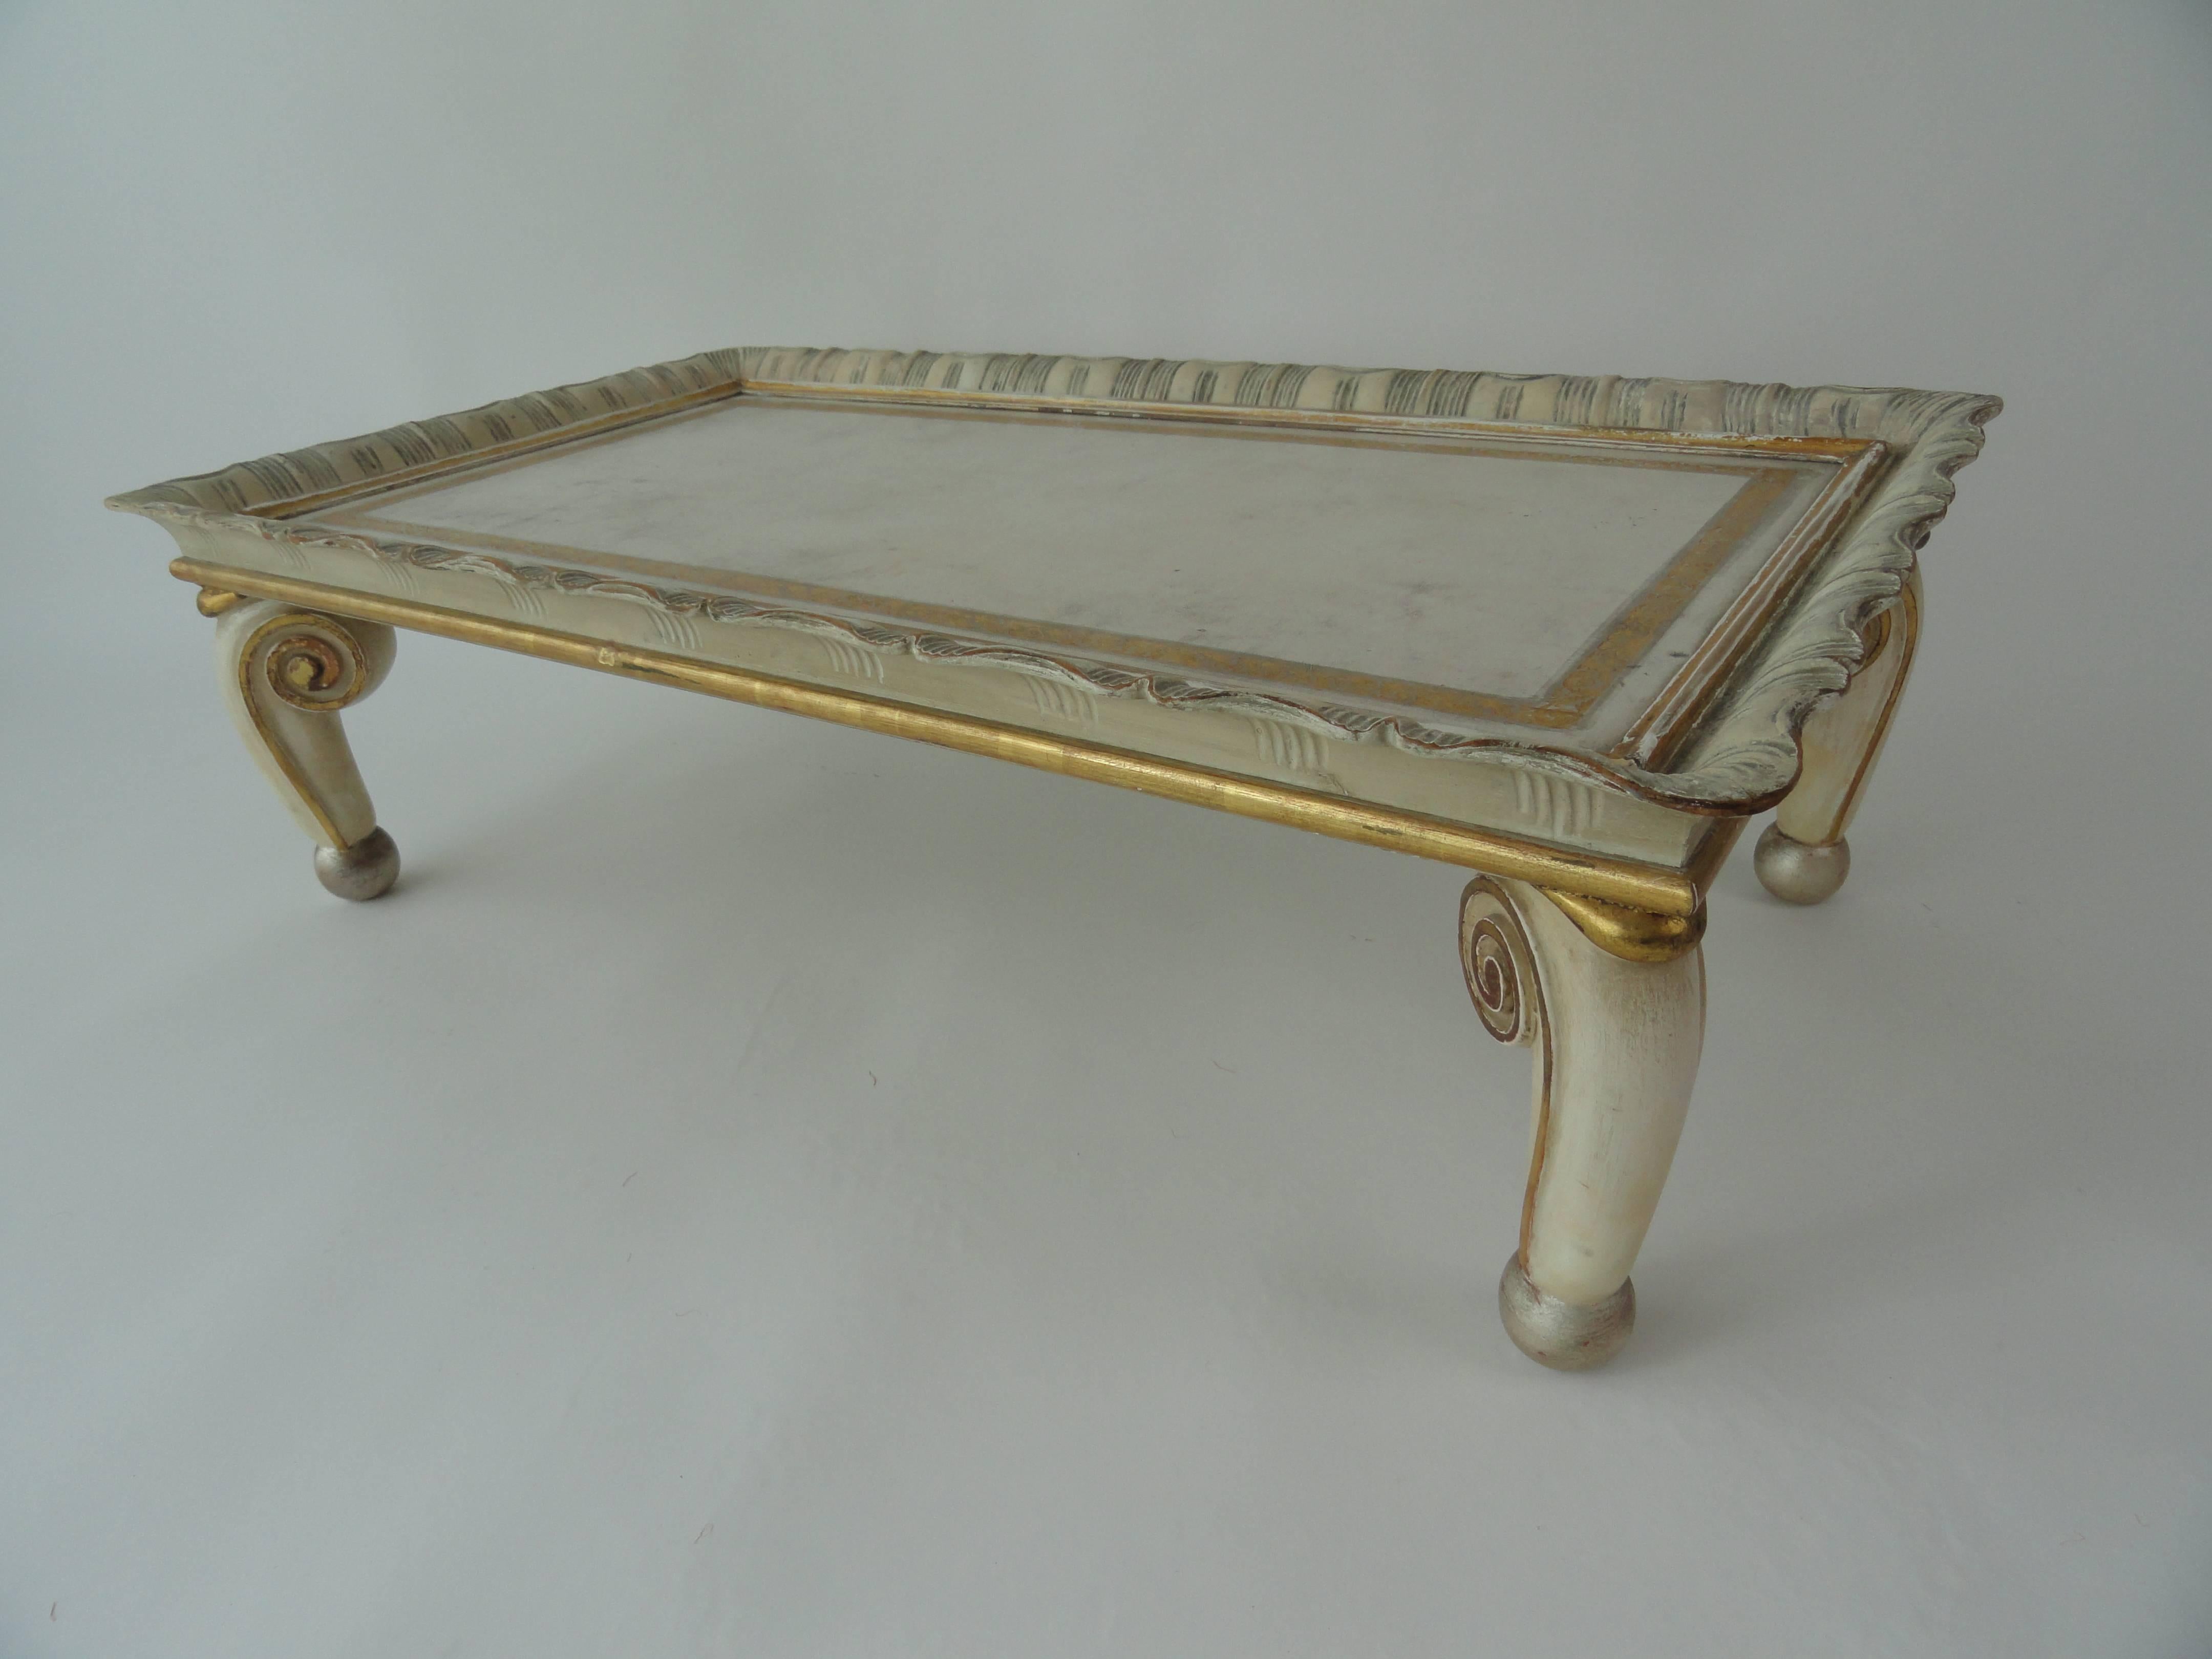 Signed and numbered Maison Jansen tray, circa 1952.
Wood carved tray table with original paint, gilt and tooled leather top.  Wear consistent with age.
Very rare and unusual.
Measures 35